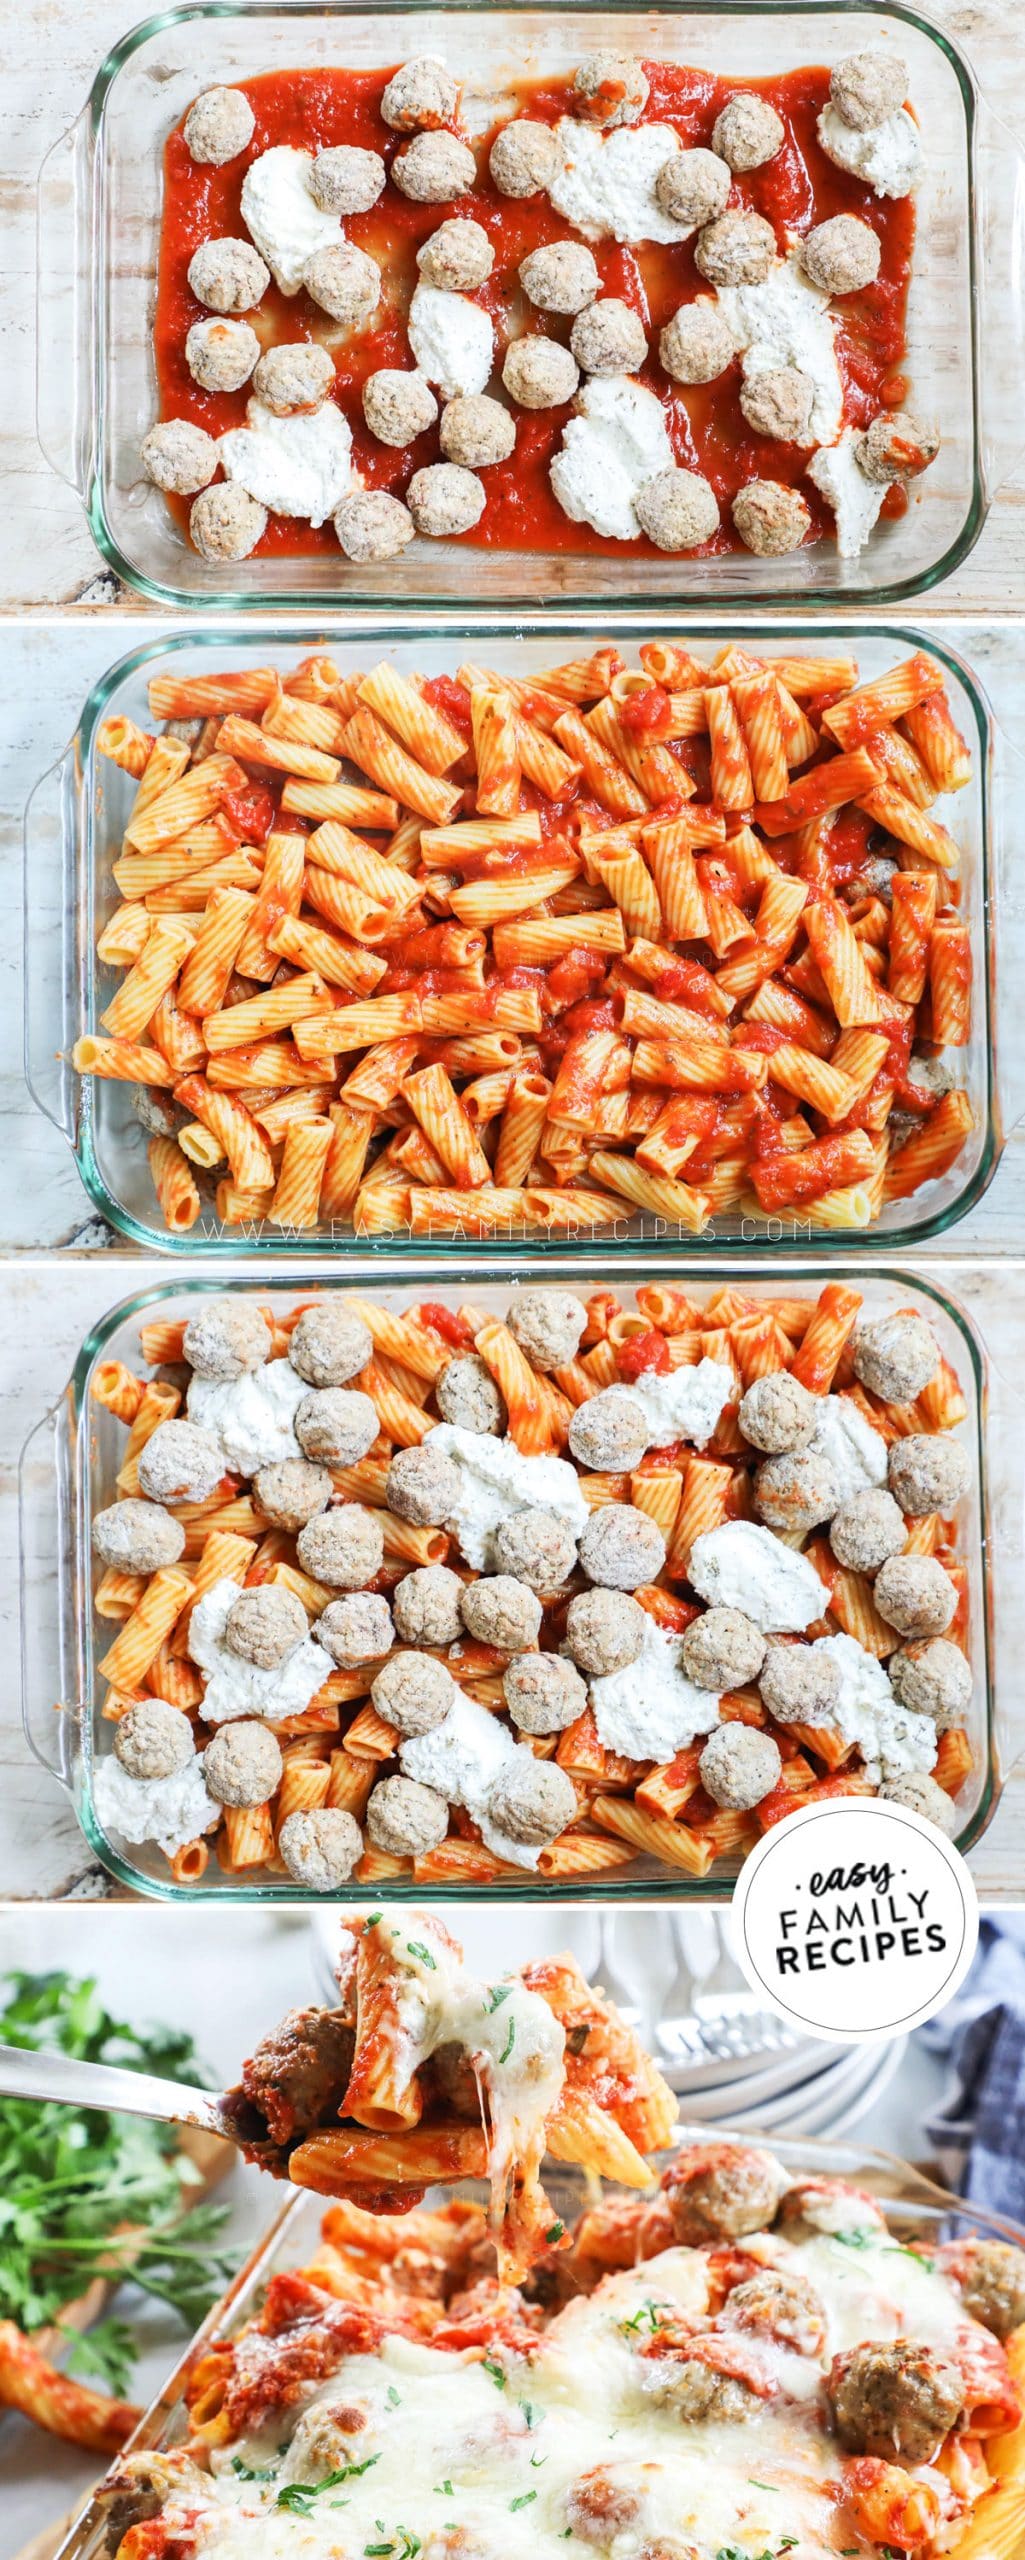 Process photos for how to make Meatball Pasta Bake Casserole1. Add sauce, meatballs, and cheese to casserole dish. 2. Mix pasta with sauce and add to casserole. 3. Top with more sauce, meatballs and cheese. 4. Bake until hot throughout.